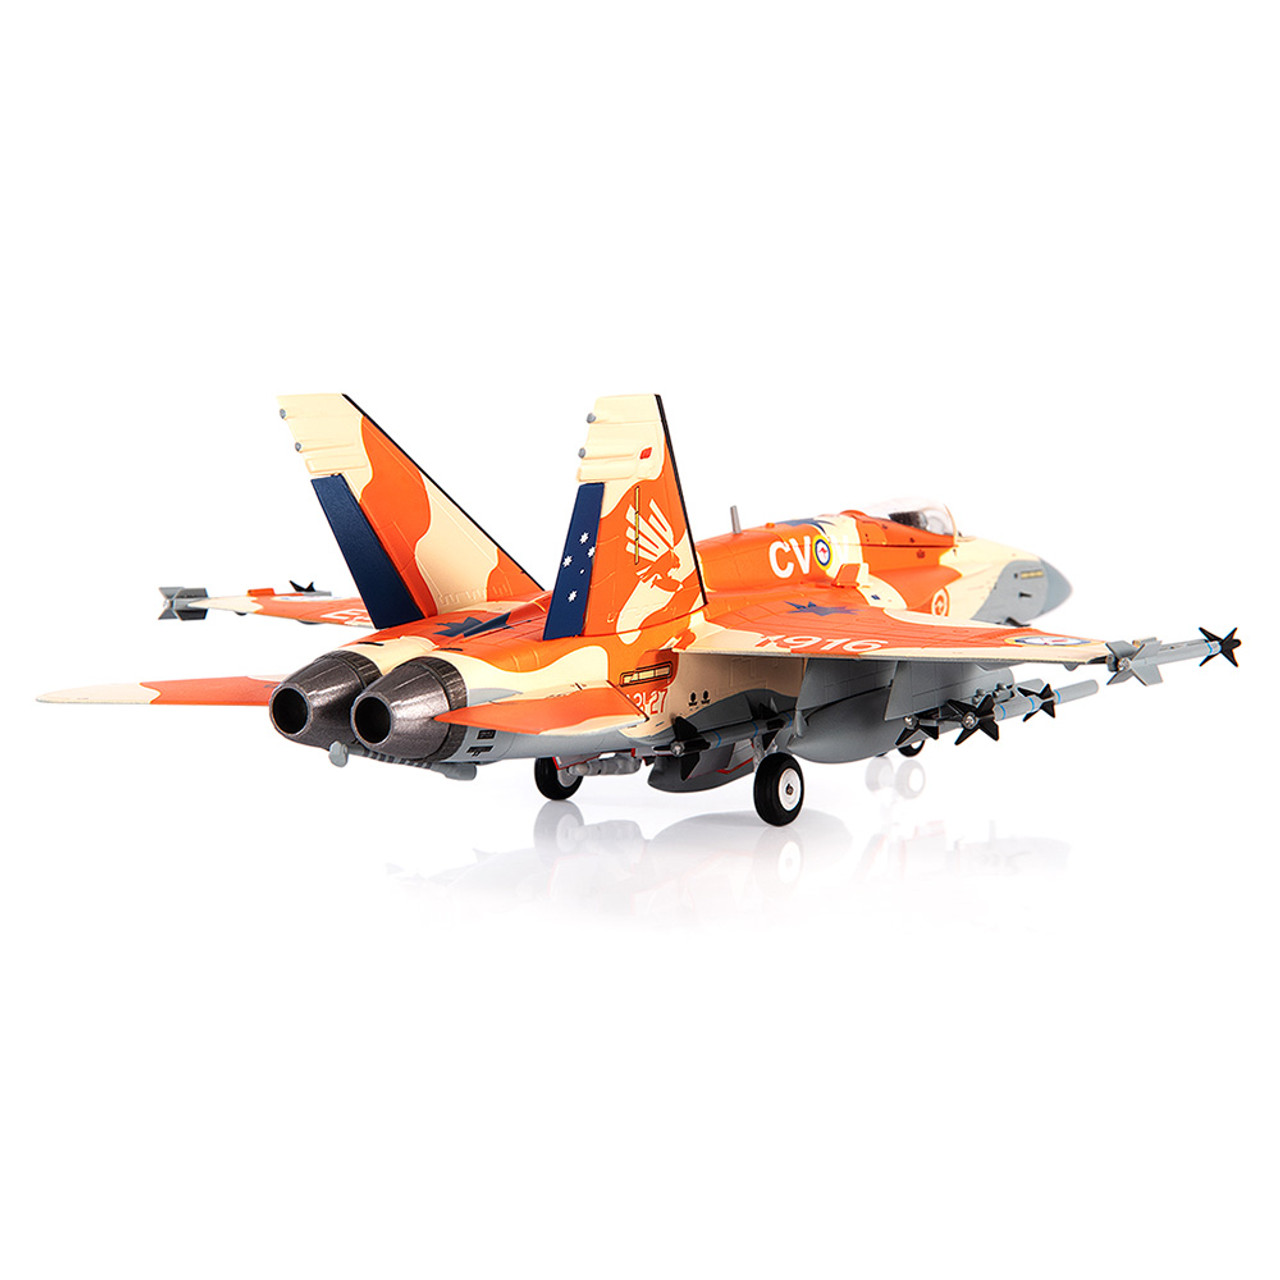 1/72 JC Wings 2016 F/A-18A Hornet Royal Australian Air Force, 3 Squadron, 100th Anniversary Edition Model